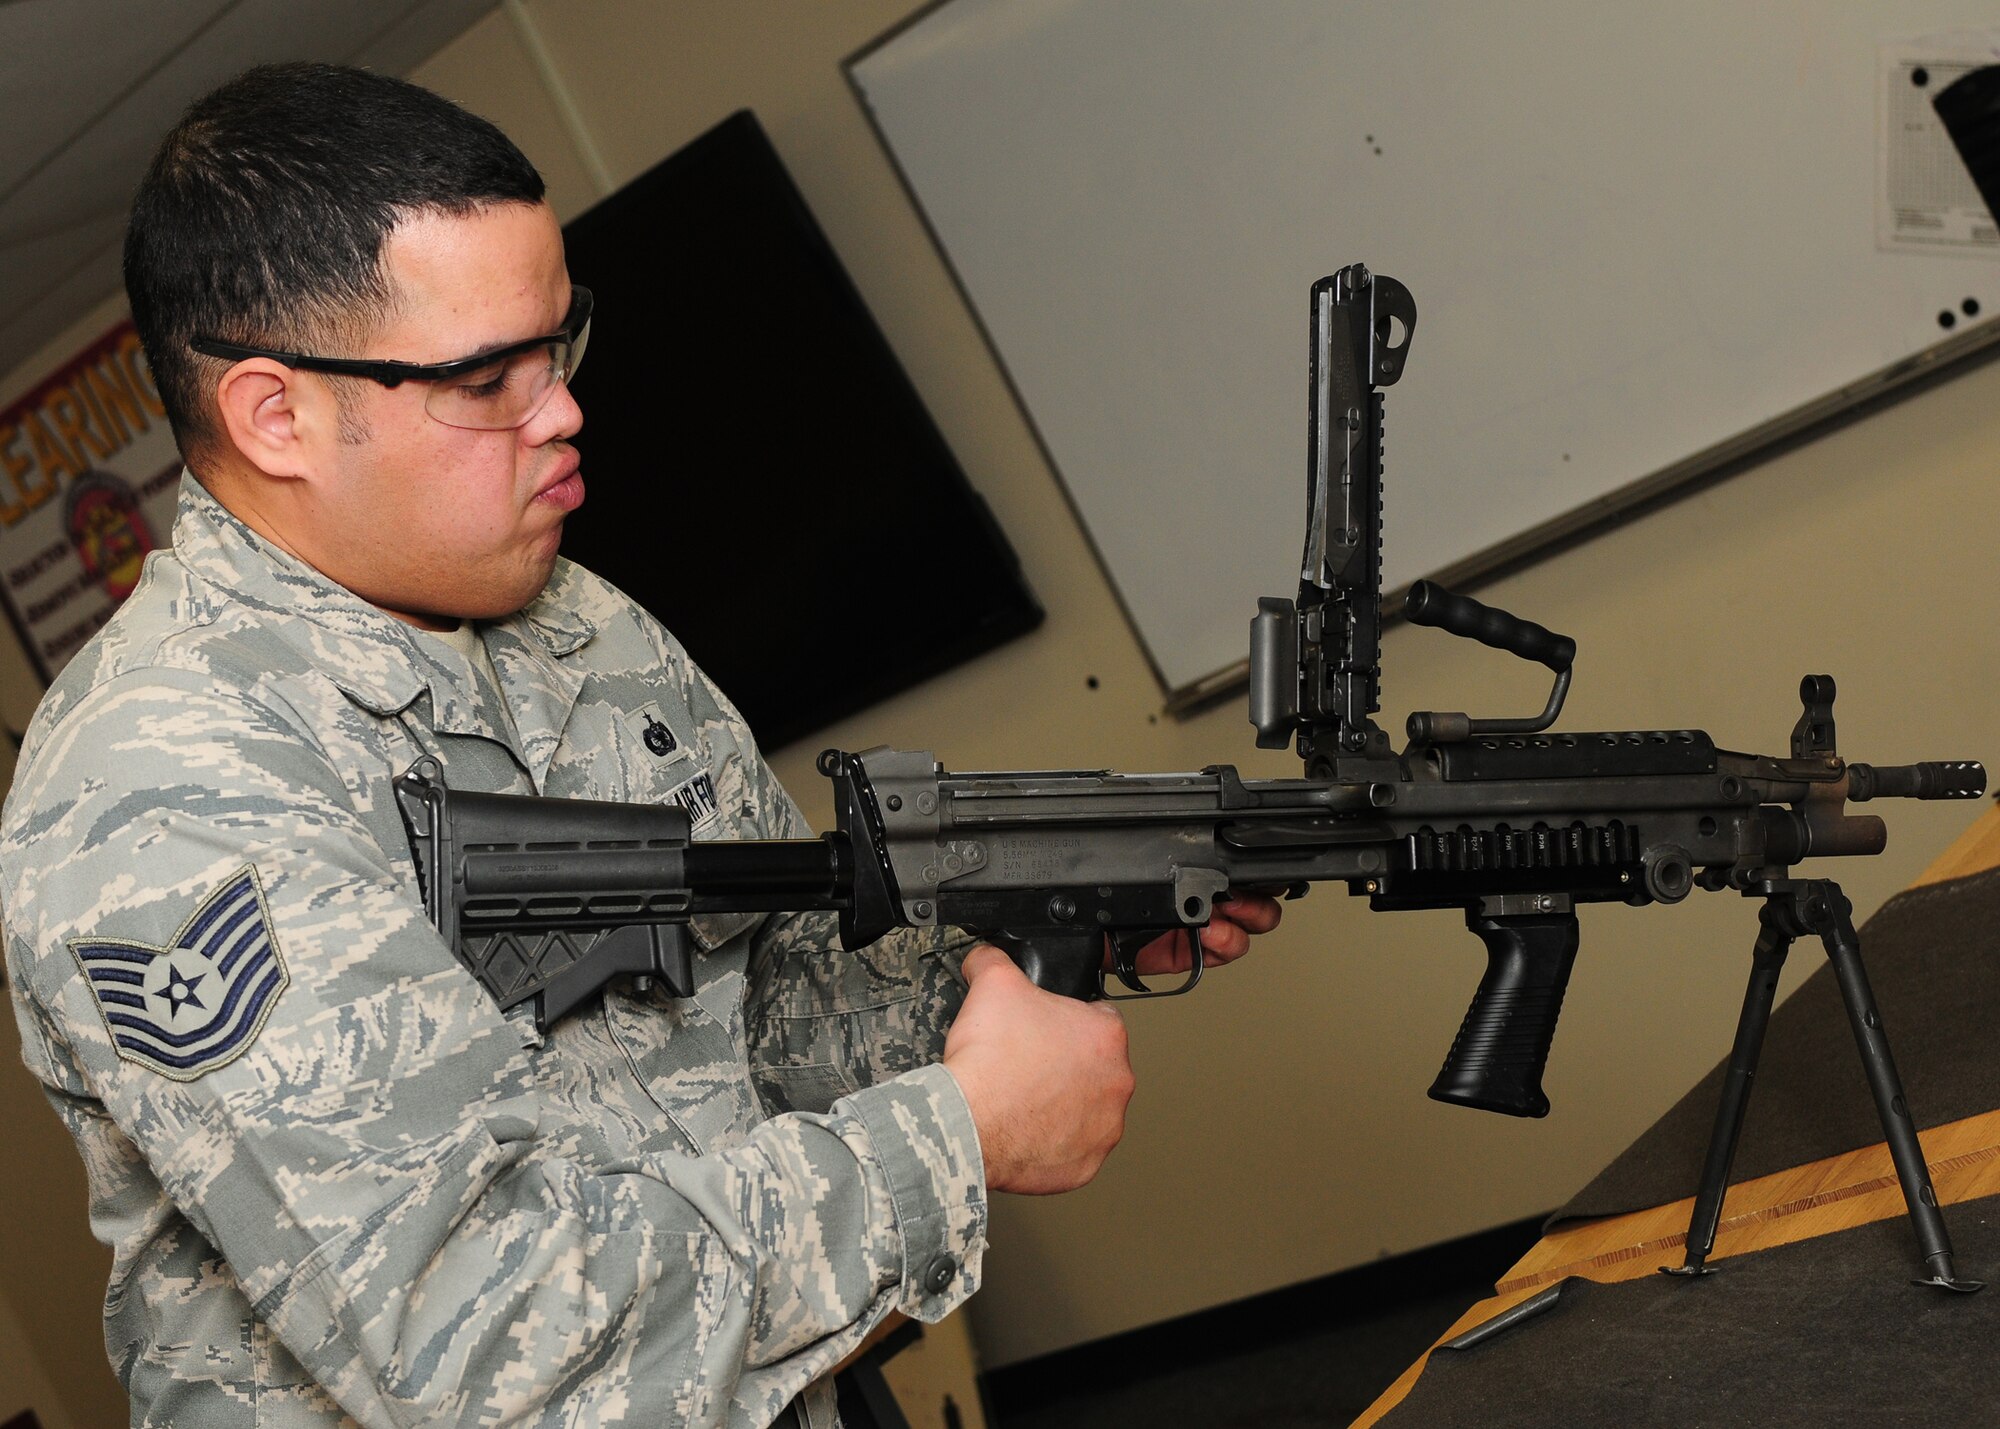 Tech. Sgt. Jesus Arias, 9th Security Forces Squadron NCO in charge of combat arms, breaks down and inspects a M-249 light machine gun at the combat arms facility on Beale Air Force Base, Calif., Jan. 10, 2013. Tech Sgt. Arias and his team train Team Beale on multiple weapons. (U.S. Air Force photo by Senior Airman Allen Pollard/Released)